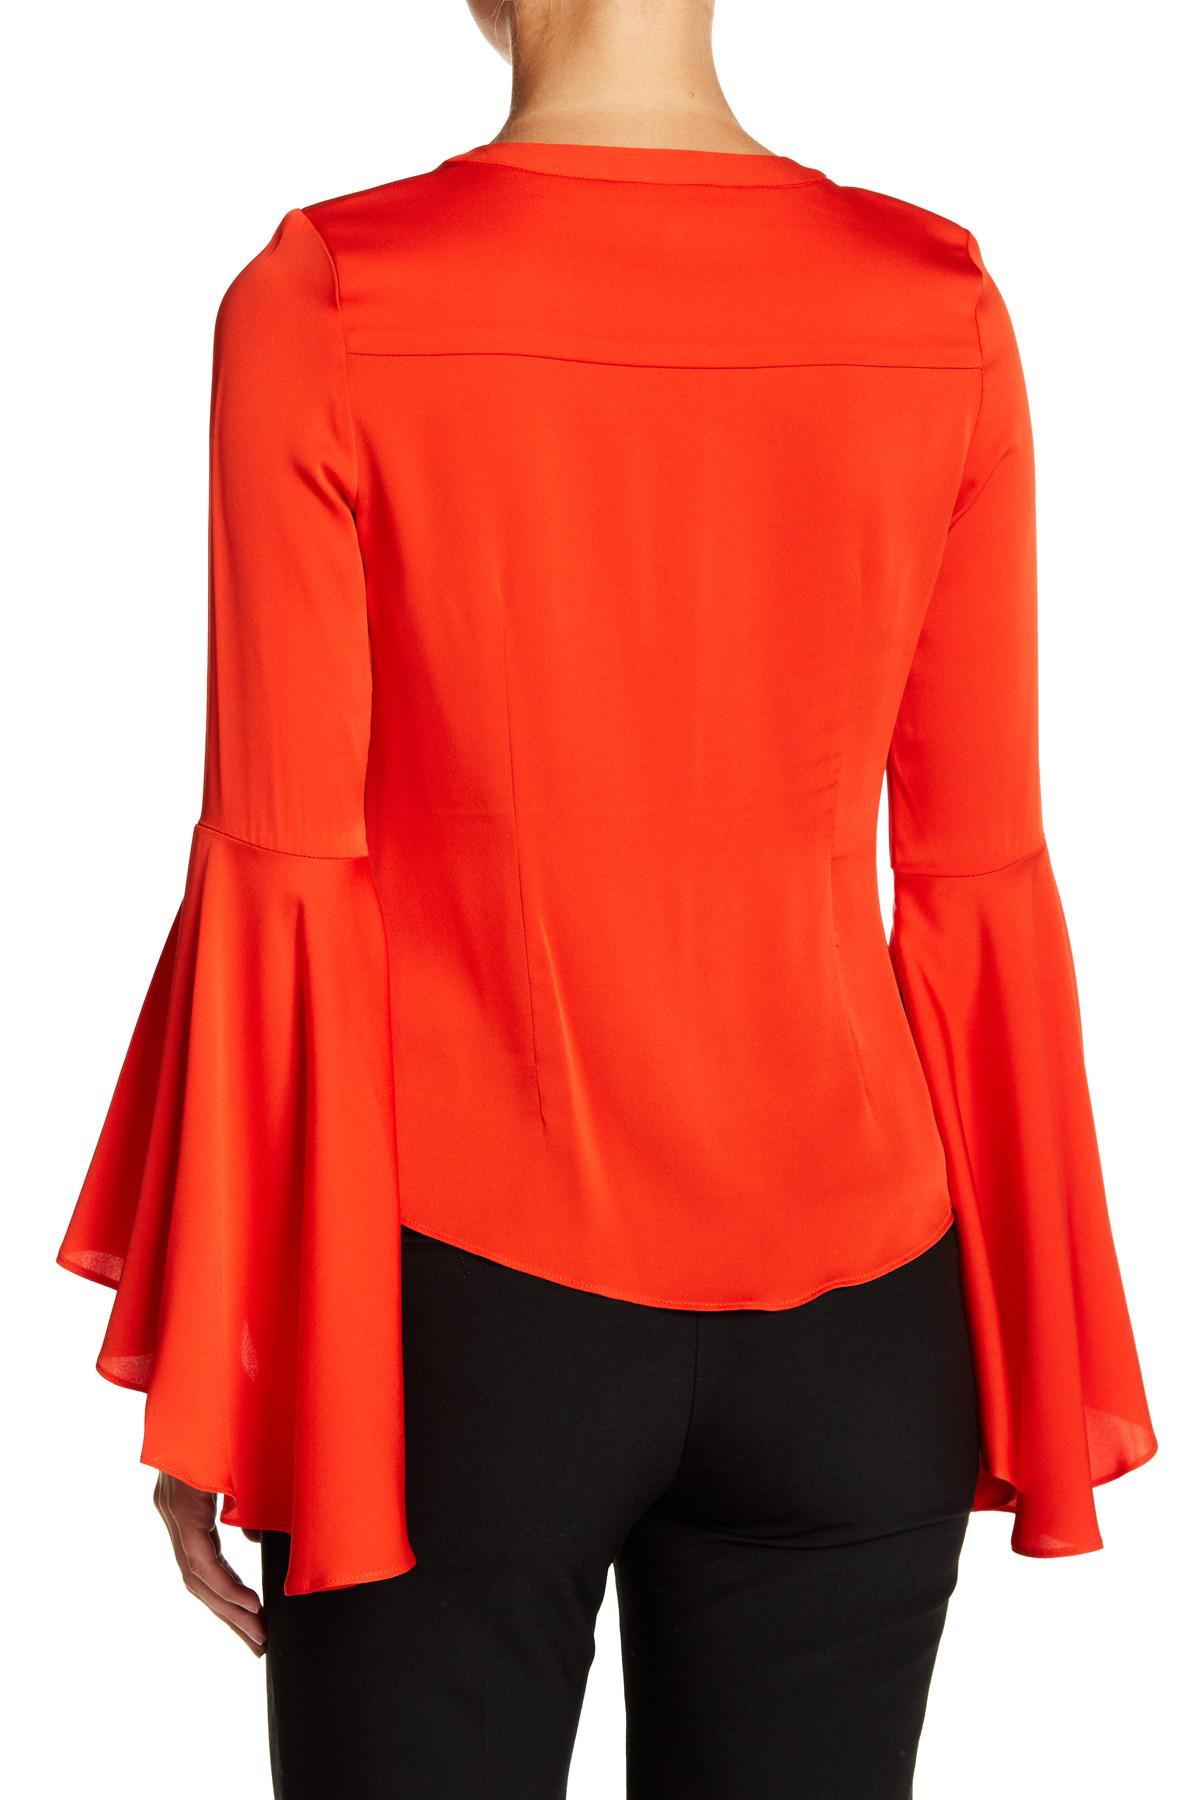 Lyst - Milly Ruffle Bell Sleeve Silk Blouse in Red